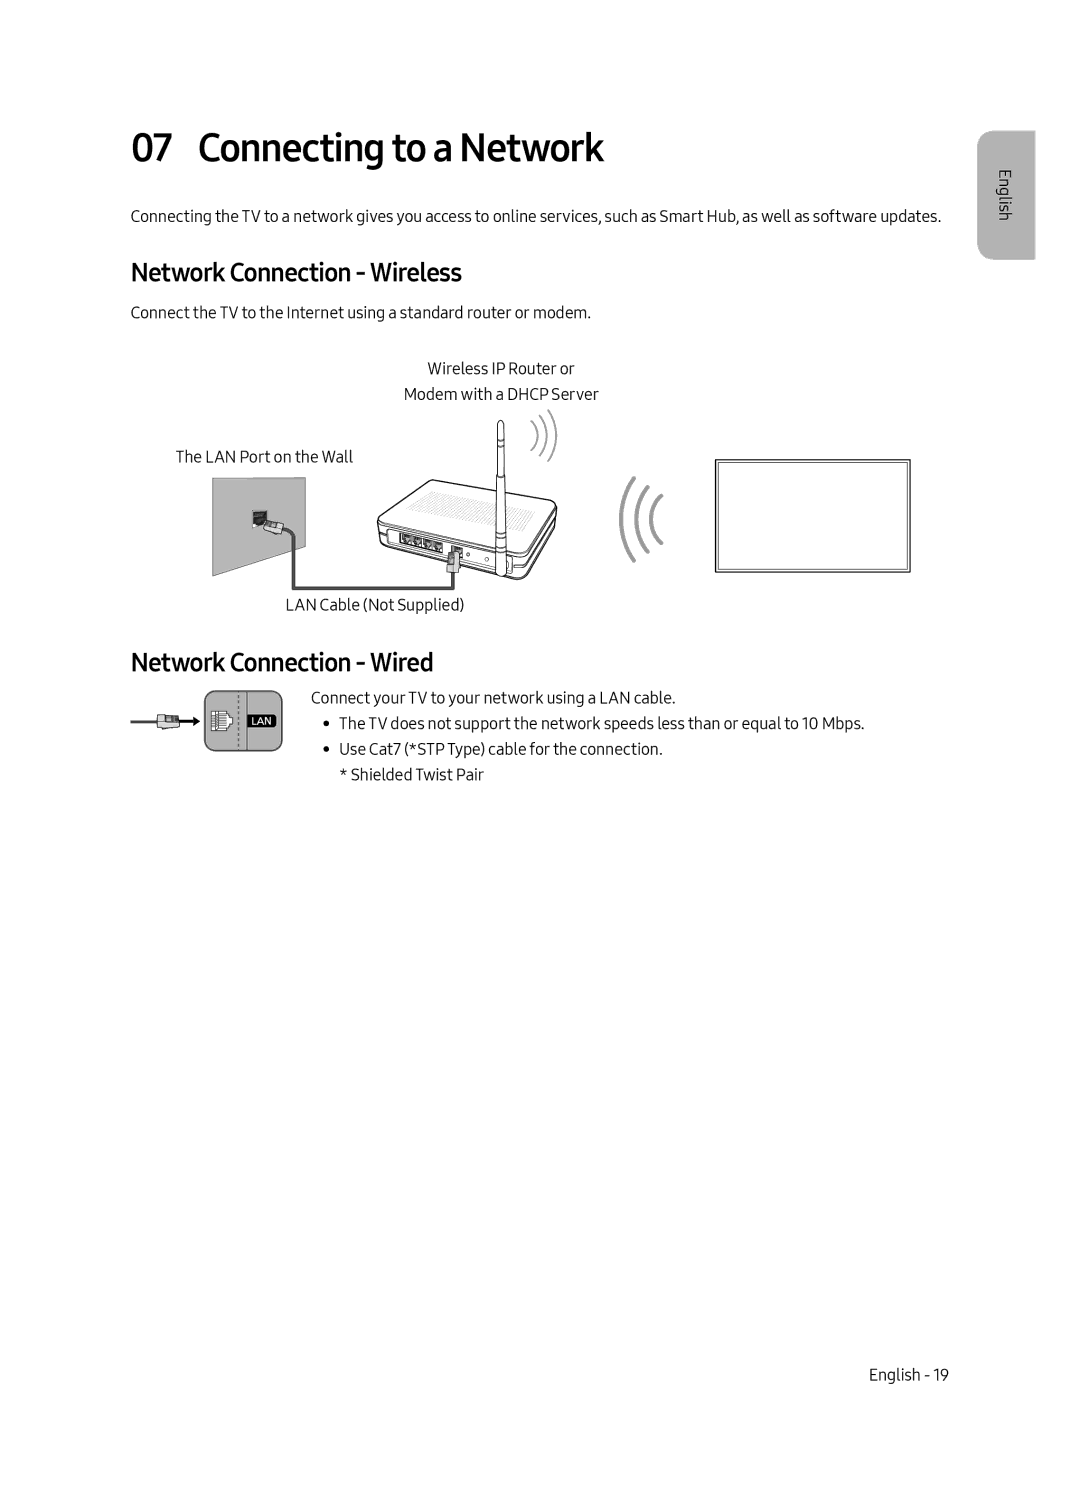 Samsung UE43LS003AUXXU, UE43LS003AUXZG manual Connecting to a Network, Network Connection Wireless, Network Connection Wired 